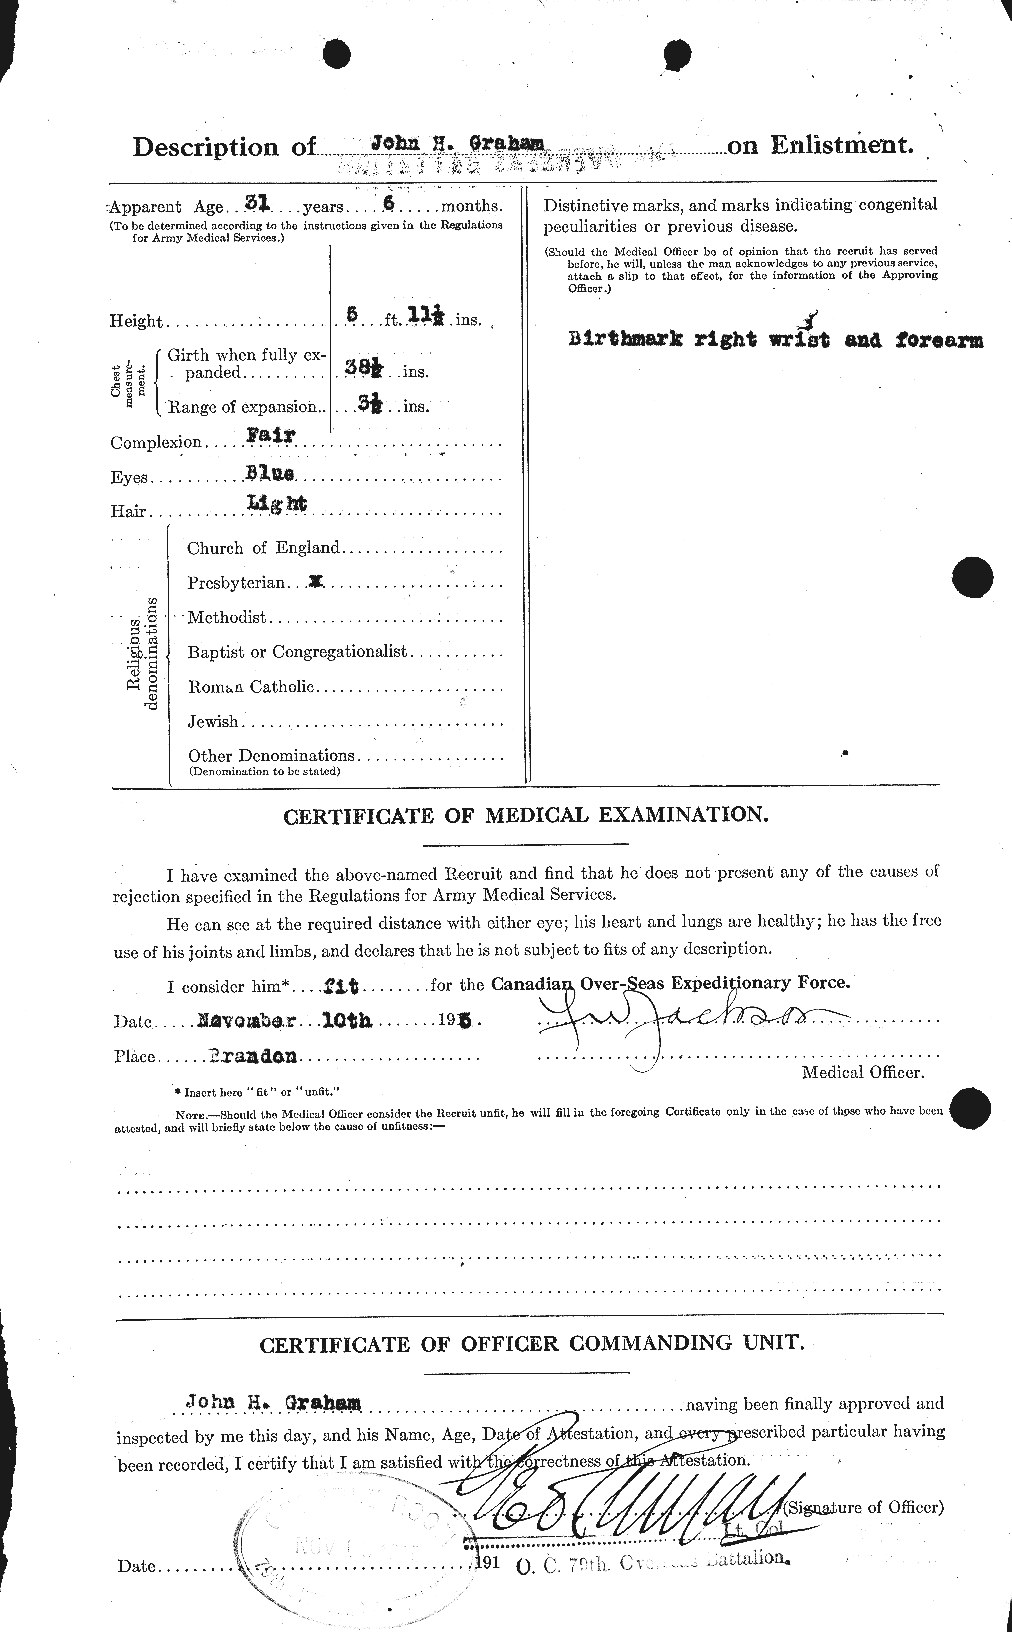 Personnel Records of the First World War - CEF 359177b